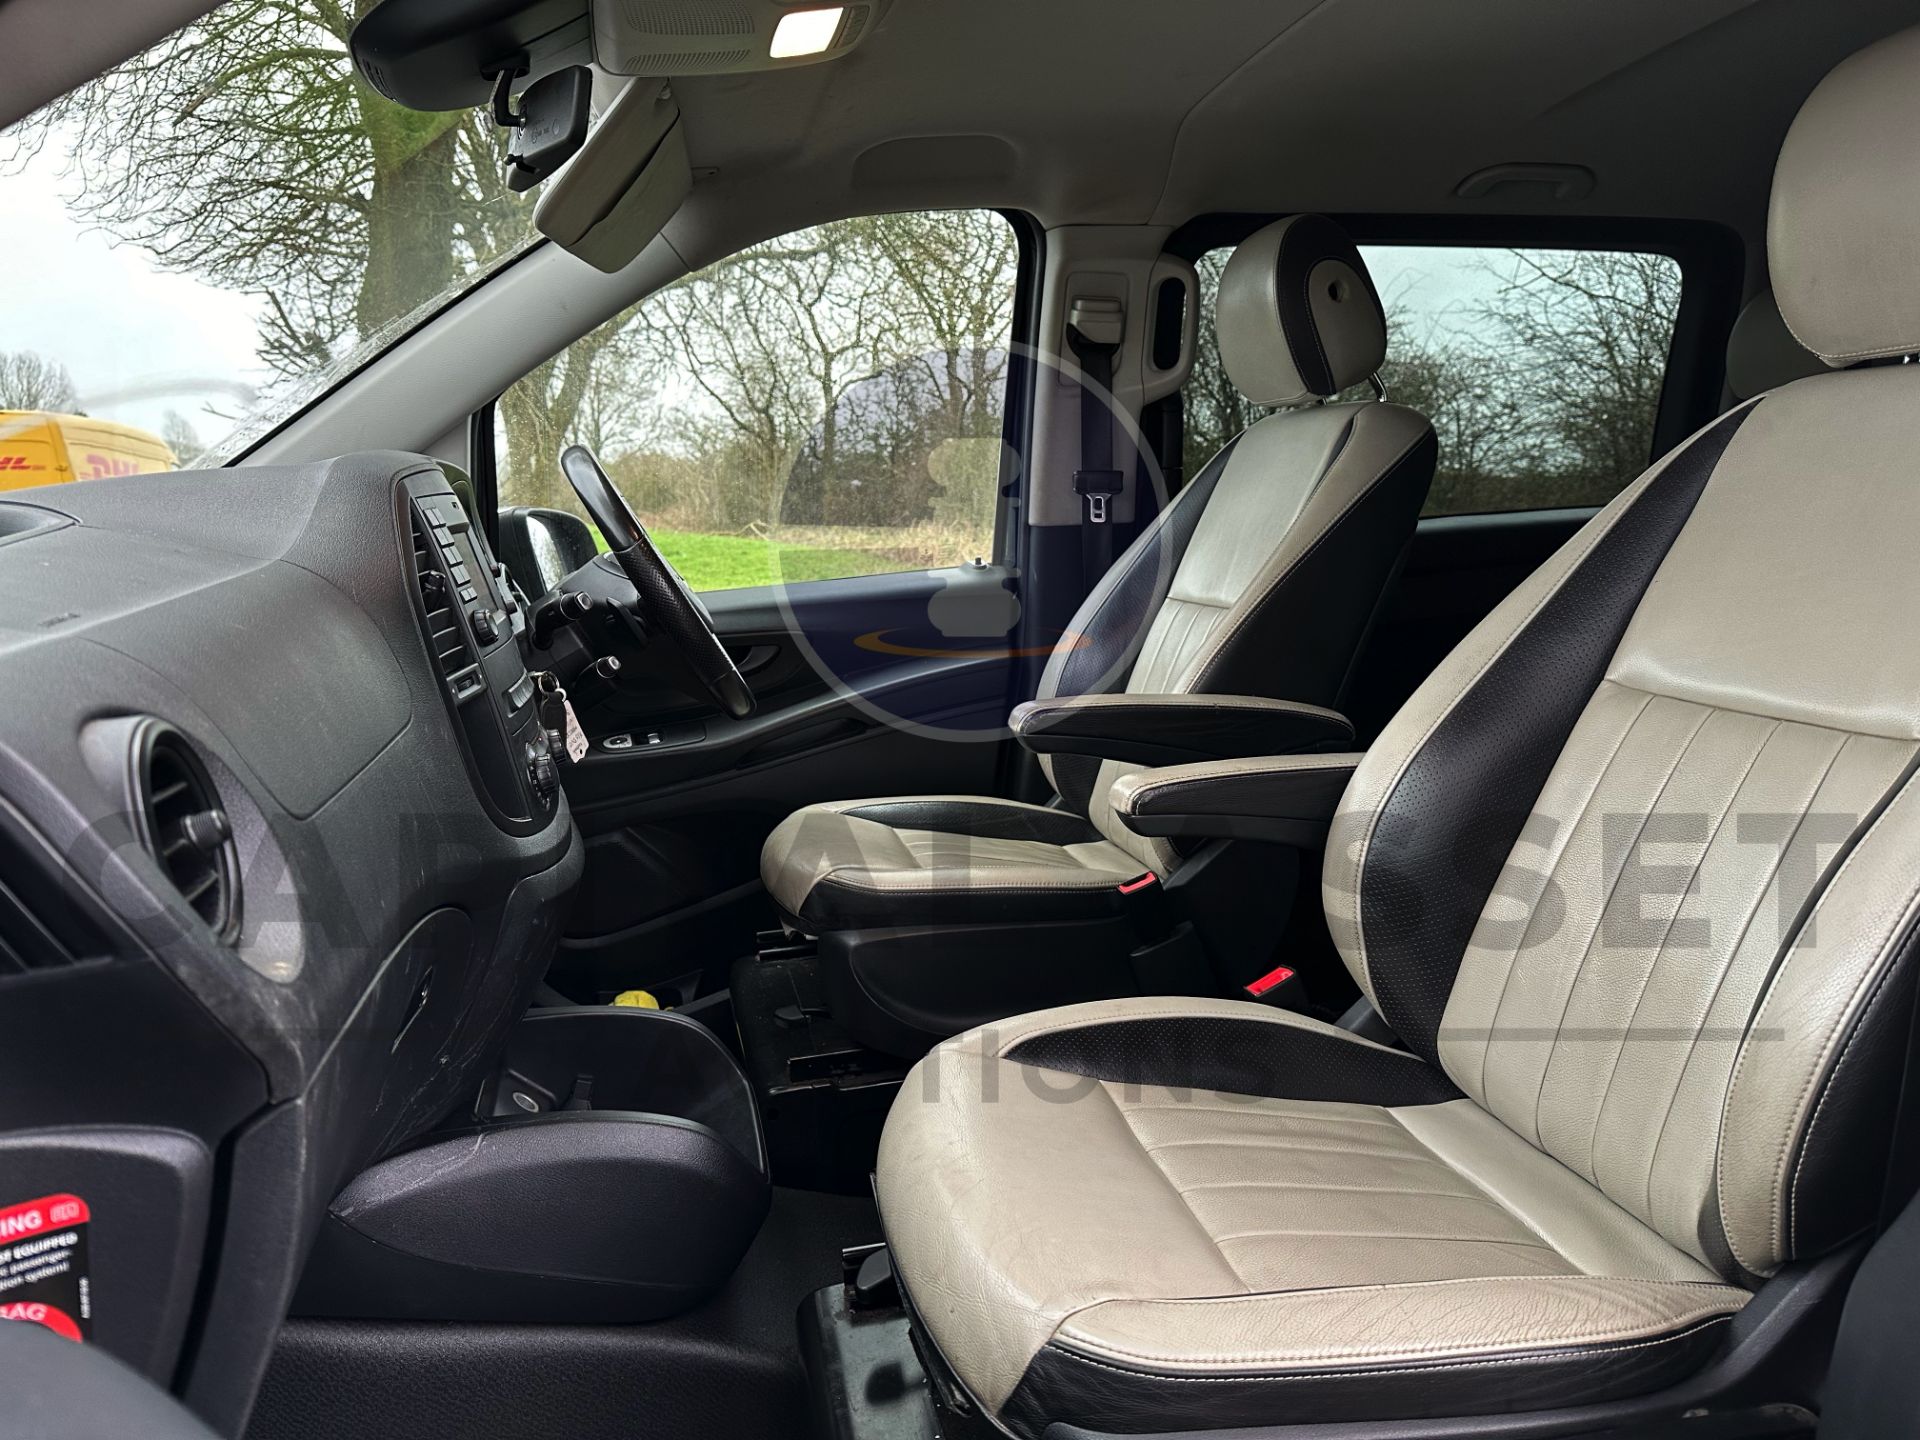 (ON SALE) MERCEDES-BENZ VITO 119 CDI AUTO *SWB - 5 SEATER DUALINER* (2019 - EURO 6) *SPORT EDITION* - Image 21 of 44